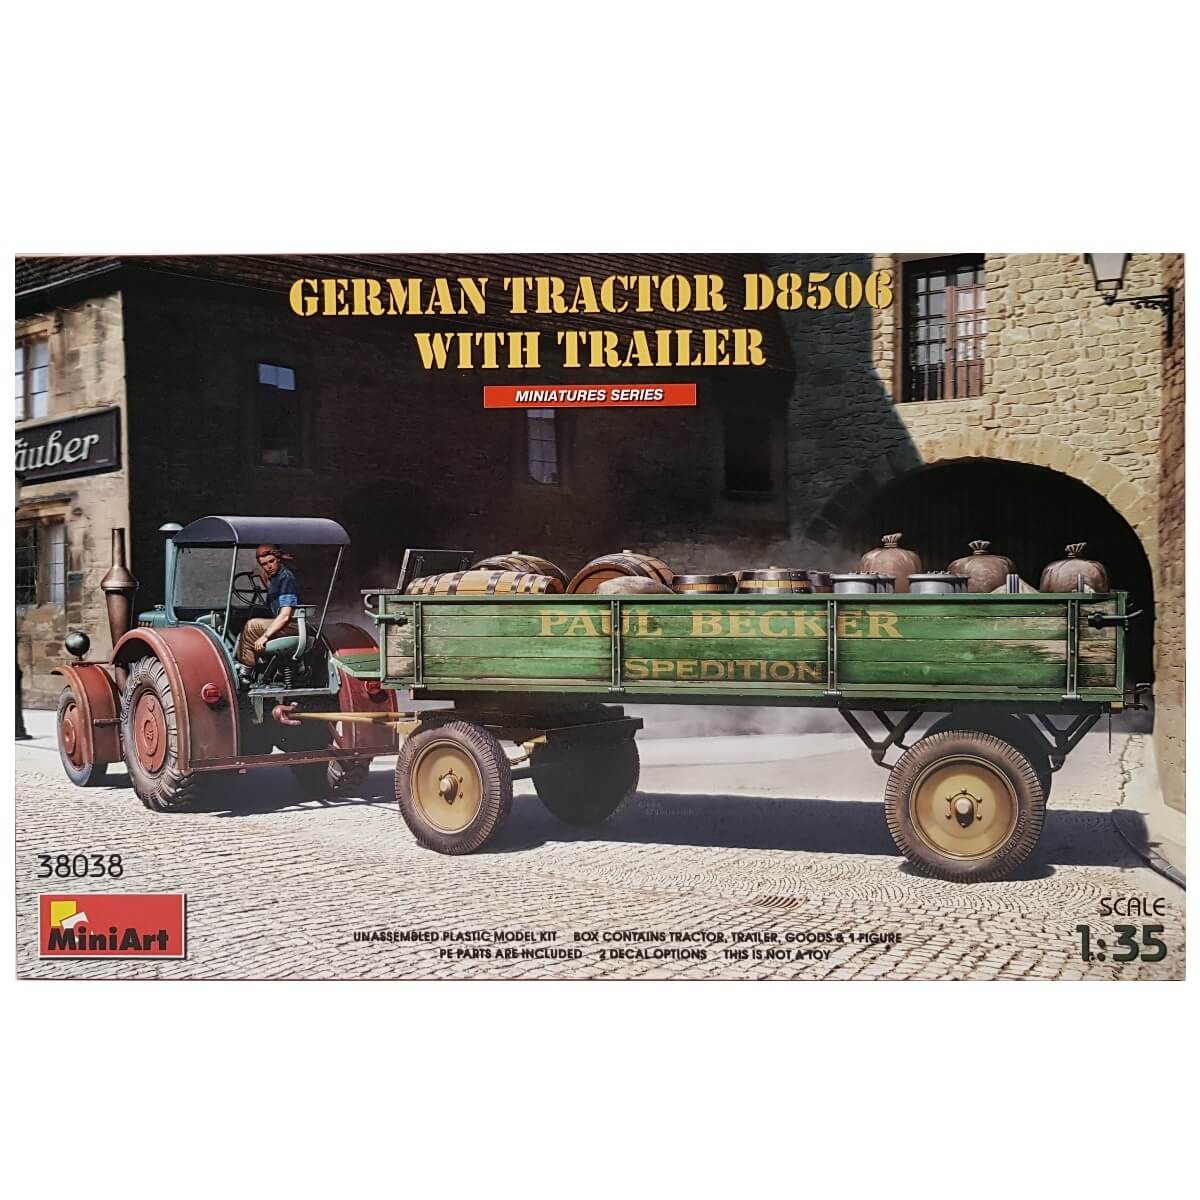 1:35 German Tractor D8506 with trailer - MINIART